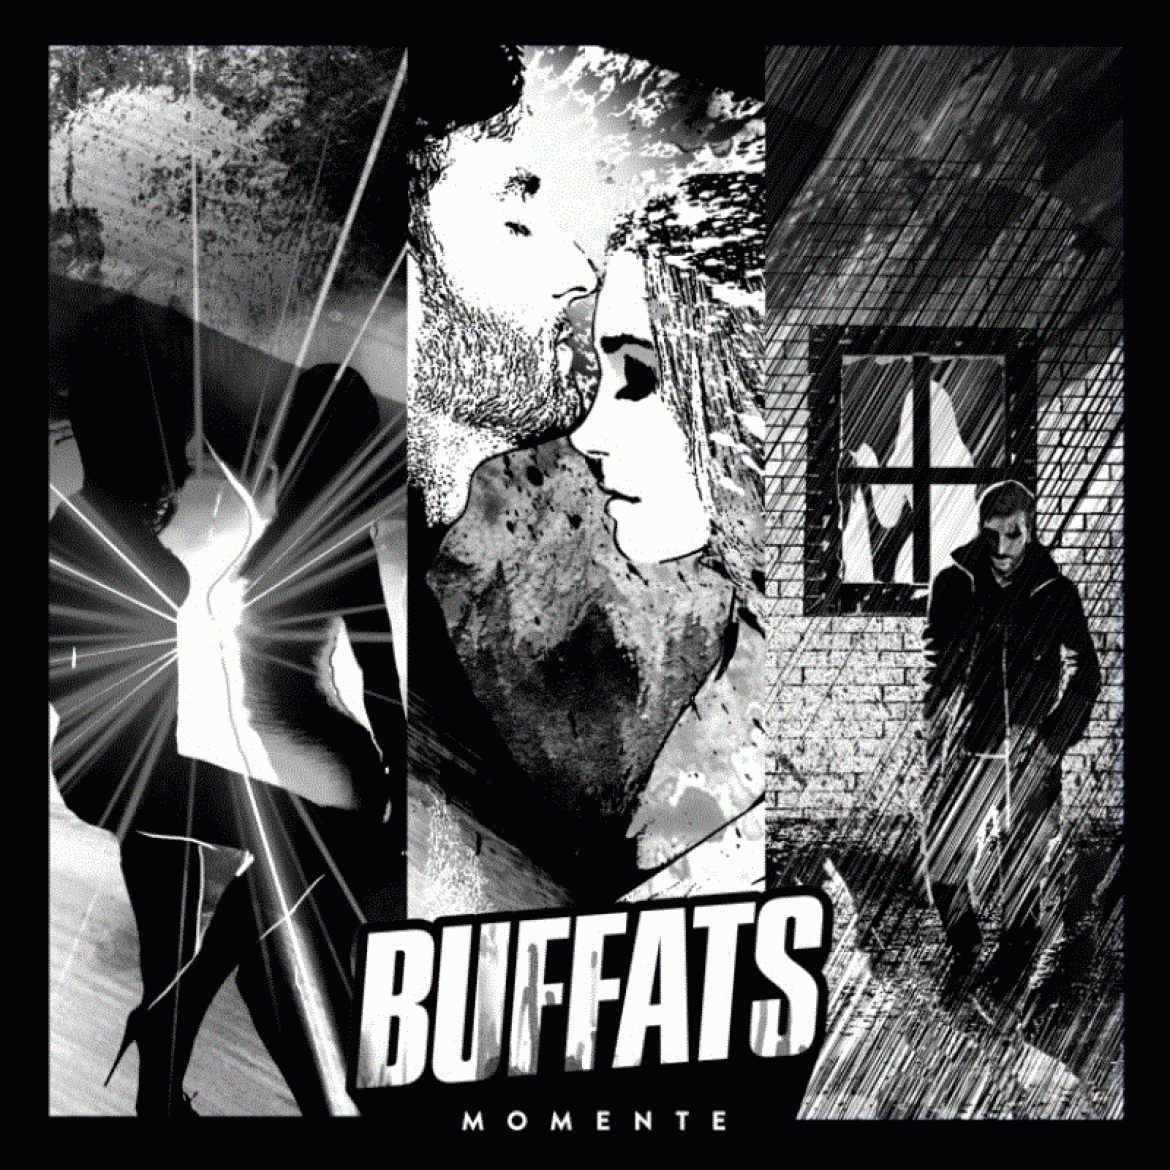 Die Buffats - Momente Cover